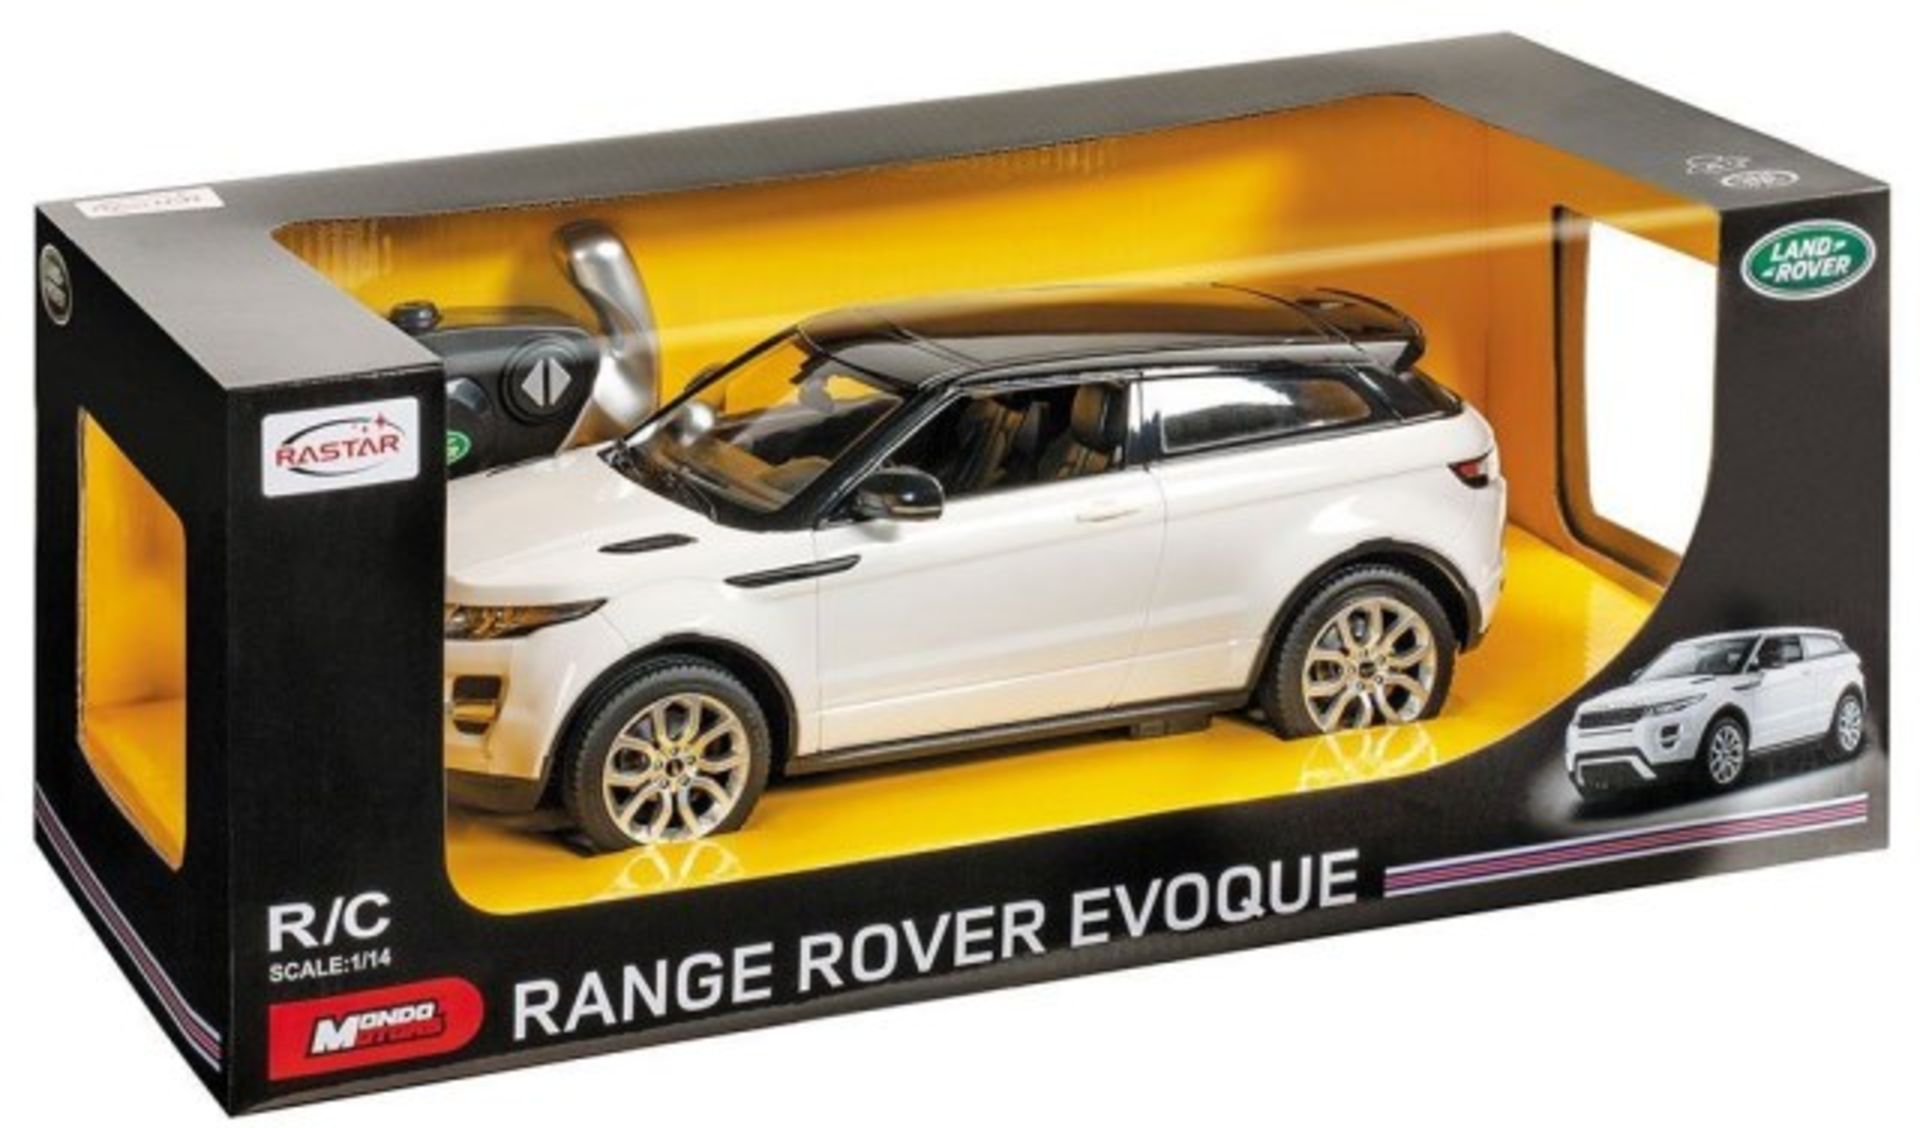 V *TRADE QTY* Brand New 1:14 Scale R/C Range Rover Evoque SRP49.99 Various Colours X 4 YOUR BID